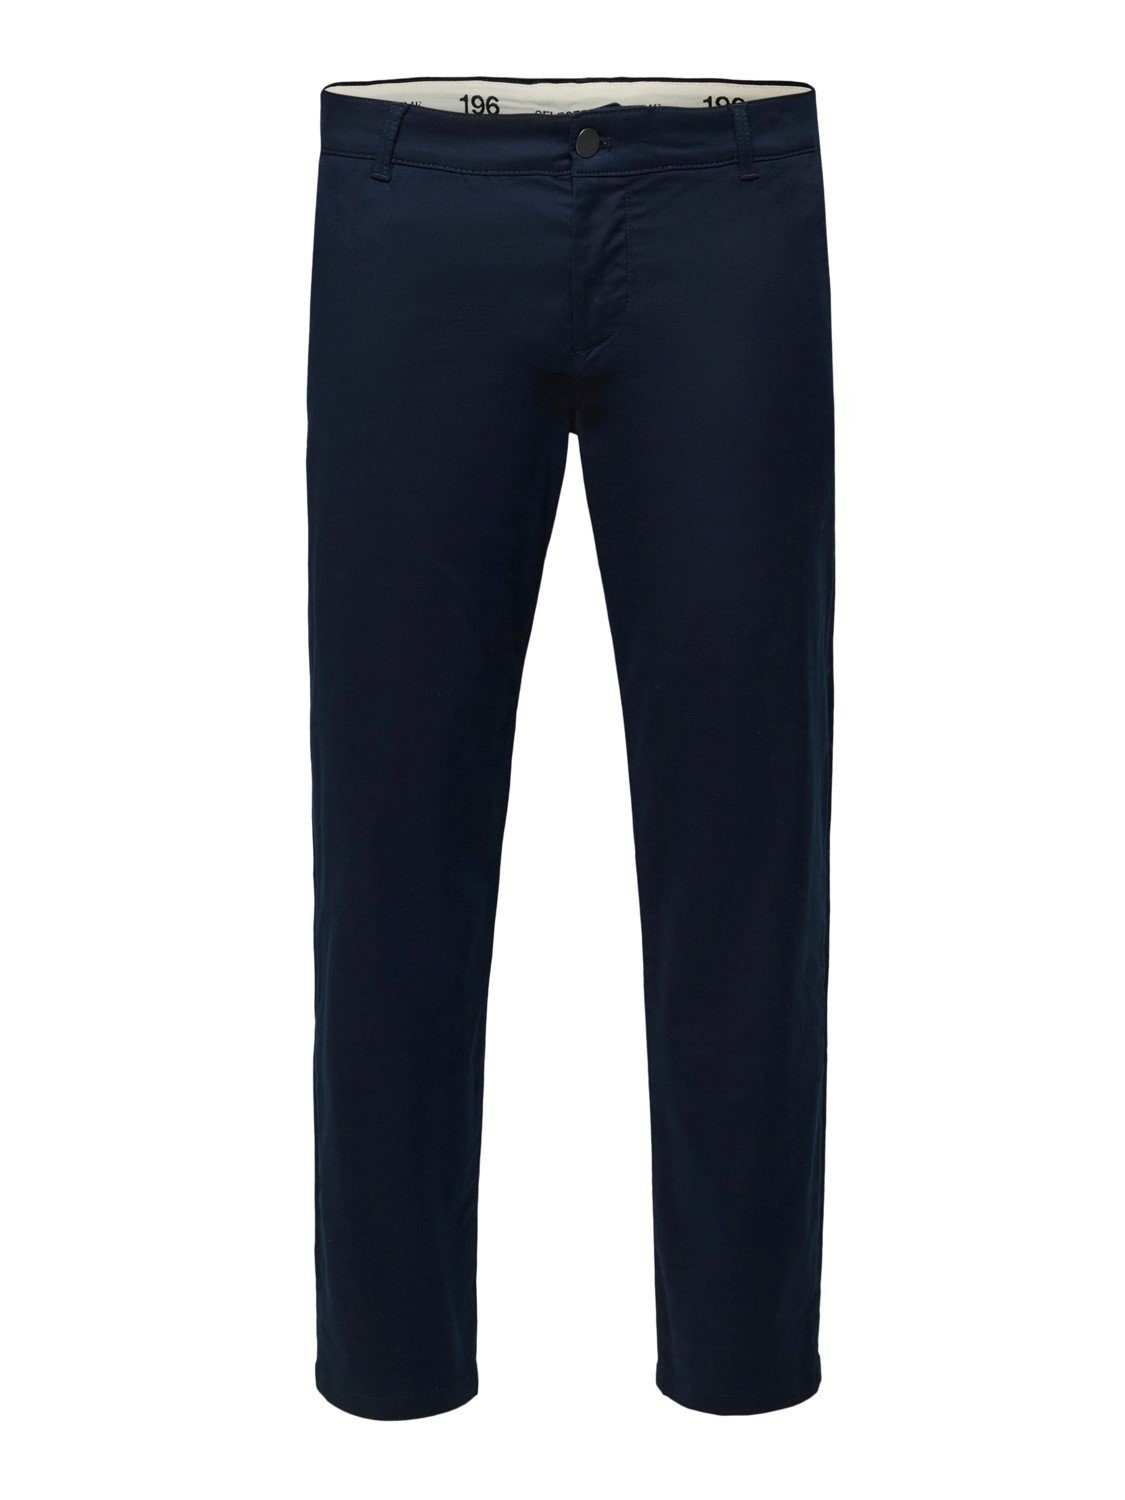 SELECTED HOMME Chinohose Baumwolle Dark SLHSTRAIGHT-STOKE 16080157 aus Sapphire